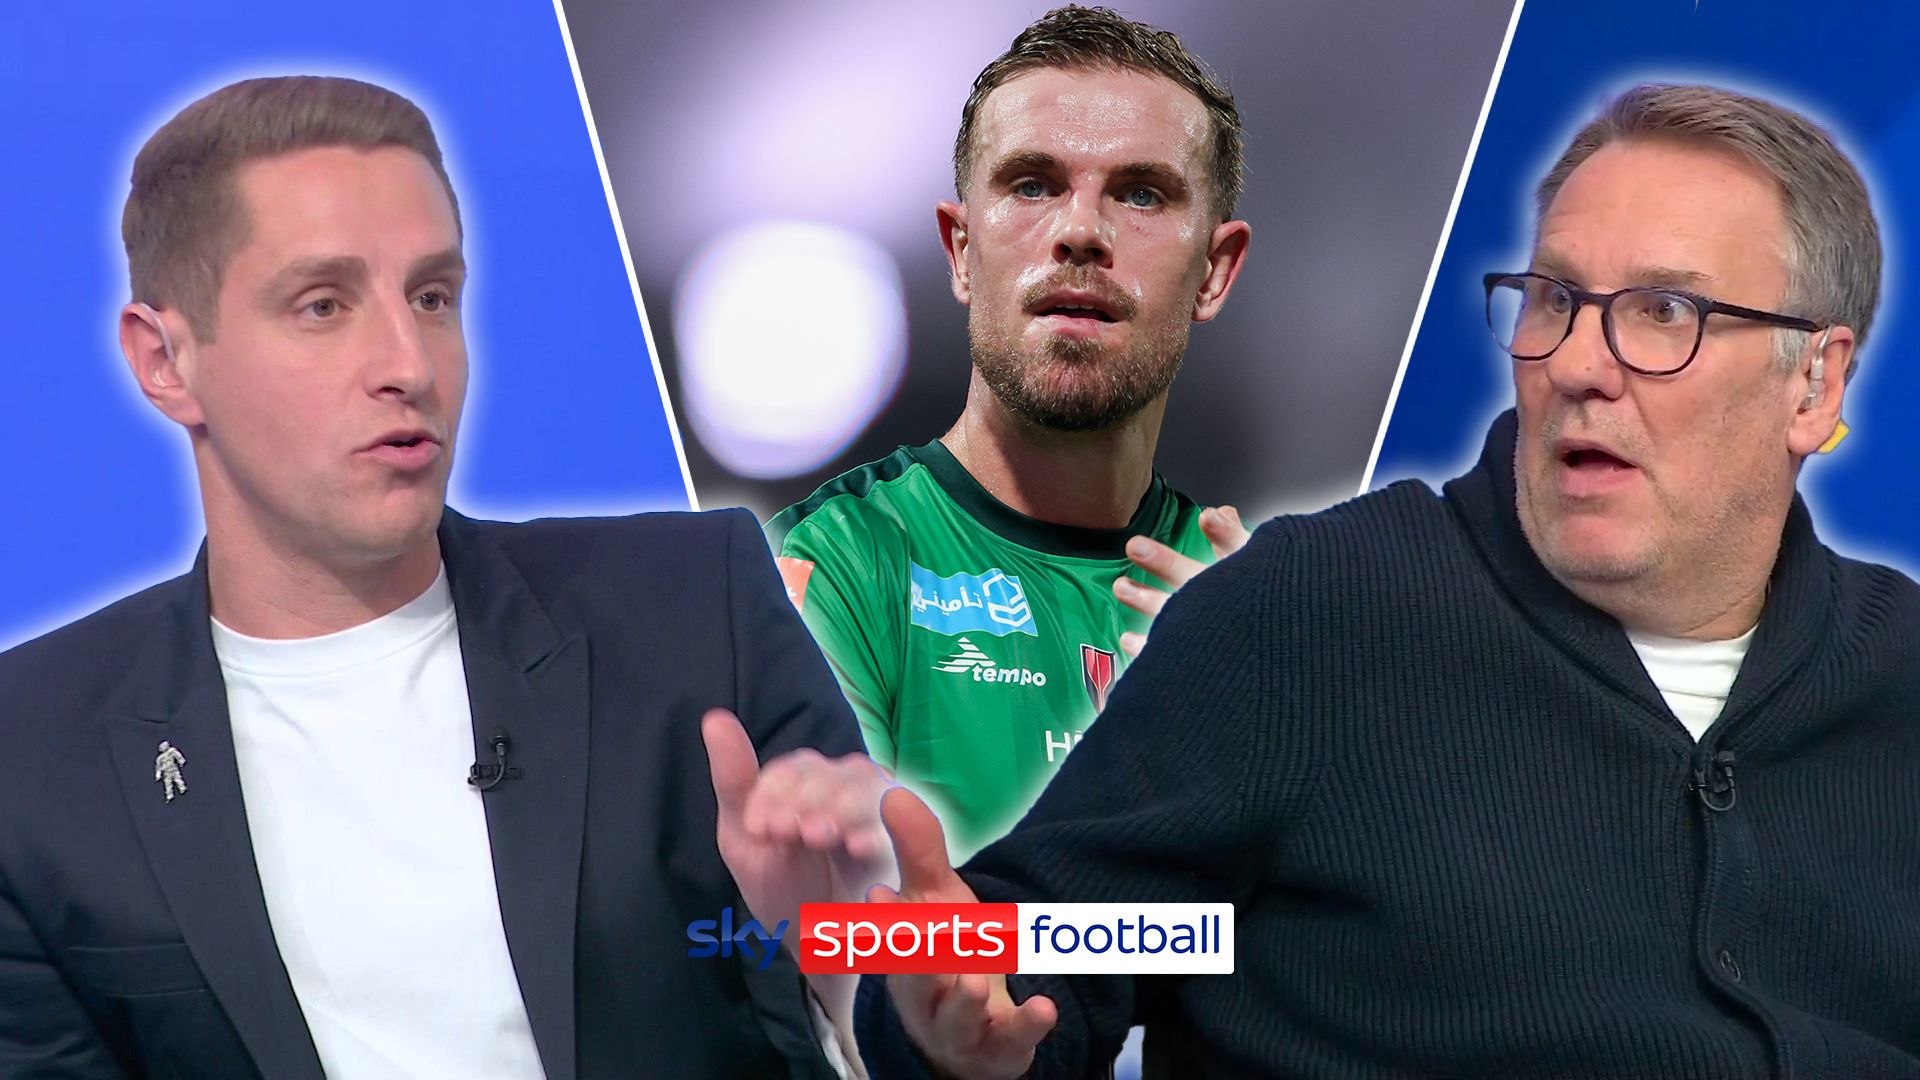 Henderson to Juve? | Merse: What if he doesn't like it there?!